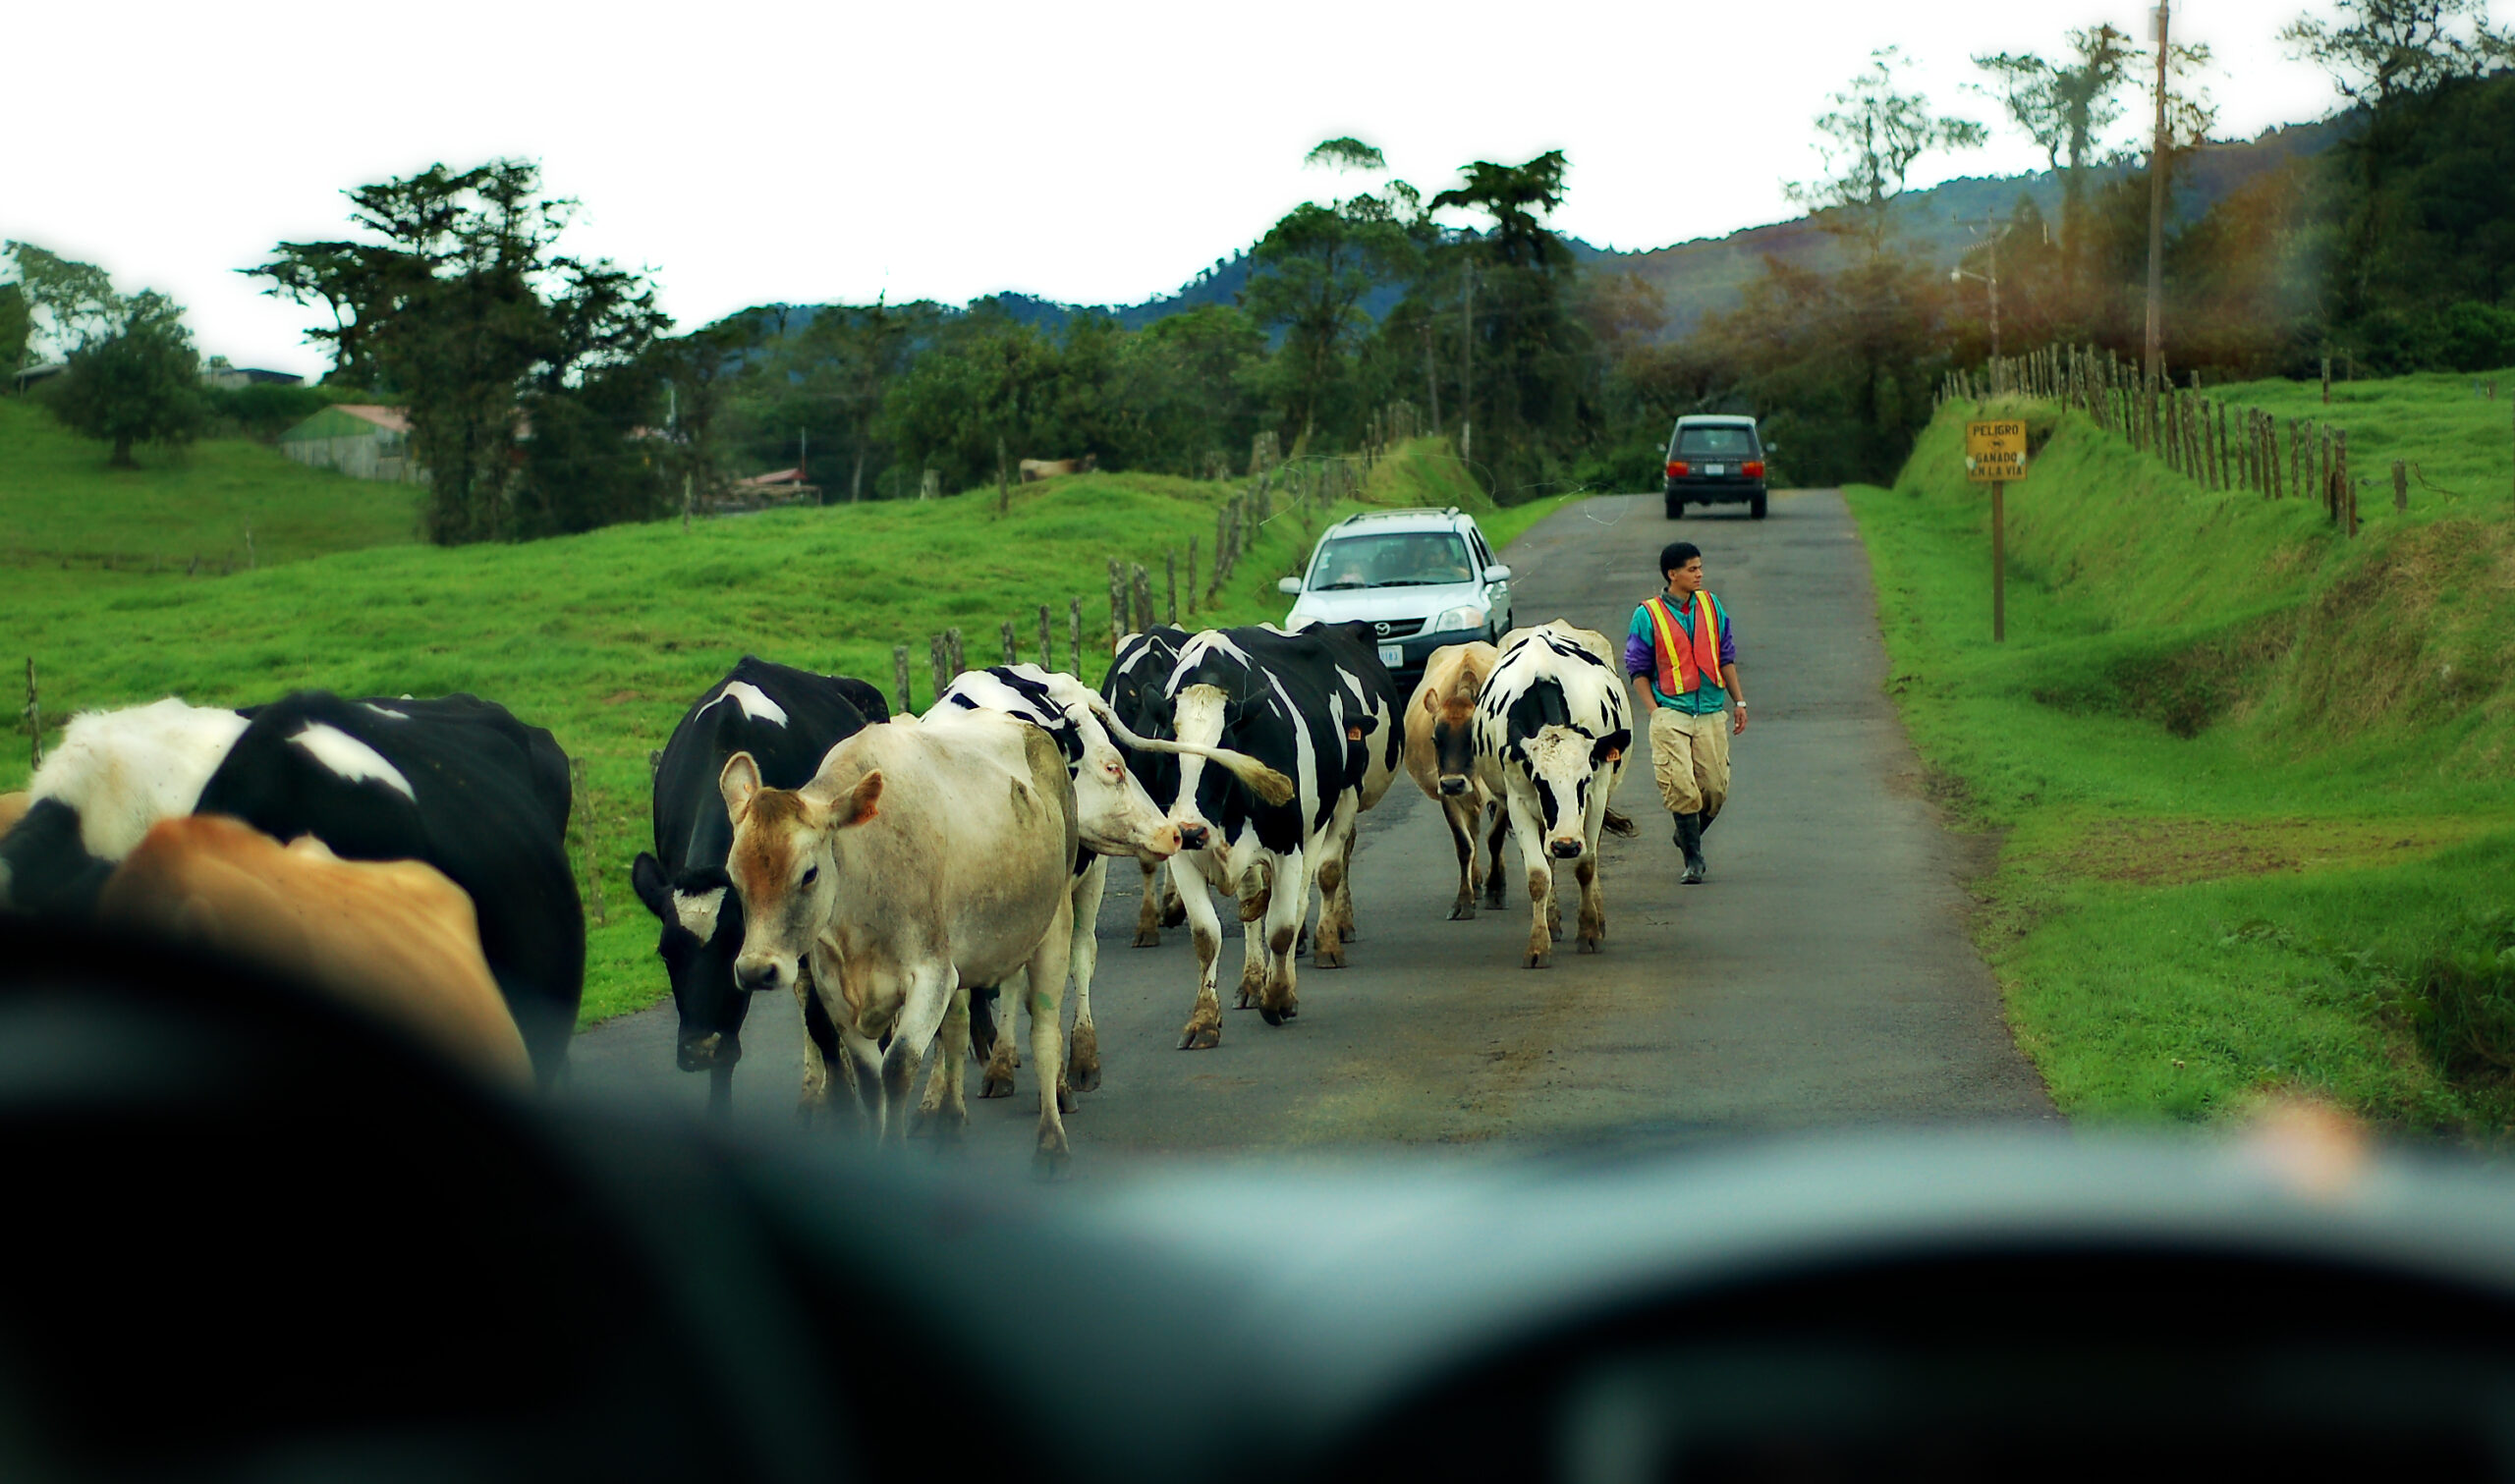 Google’s Driverless Cars Are Learning How To Avoid Cows